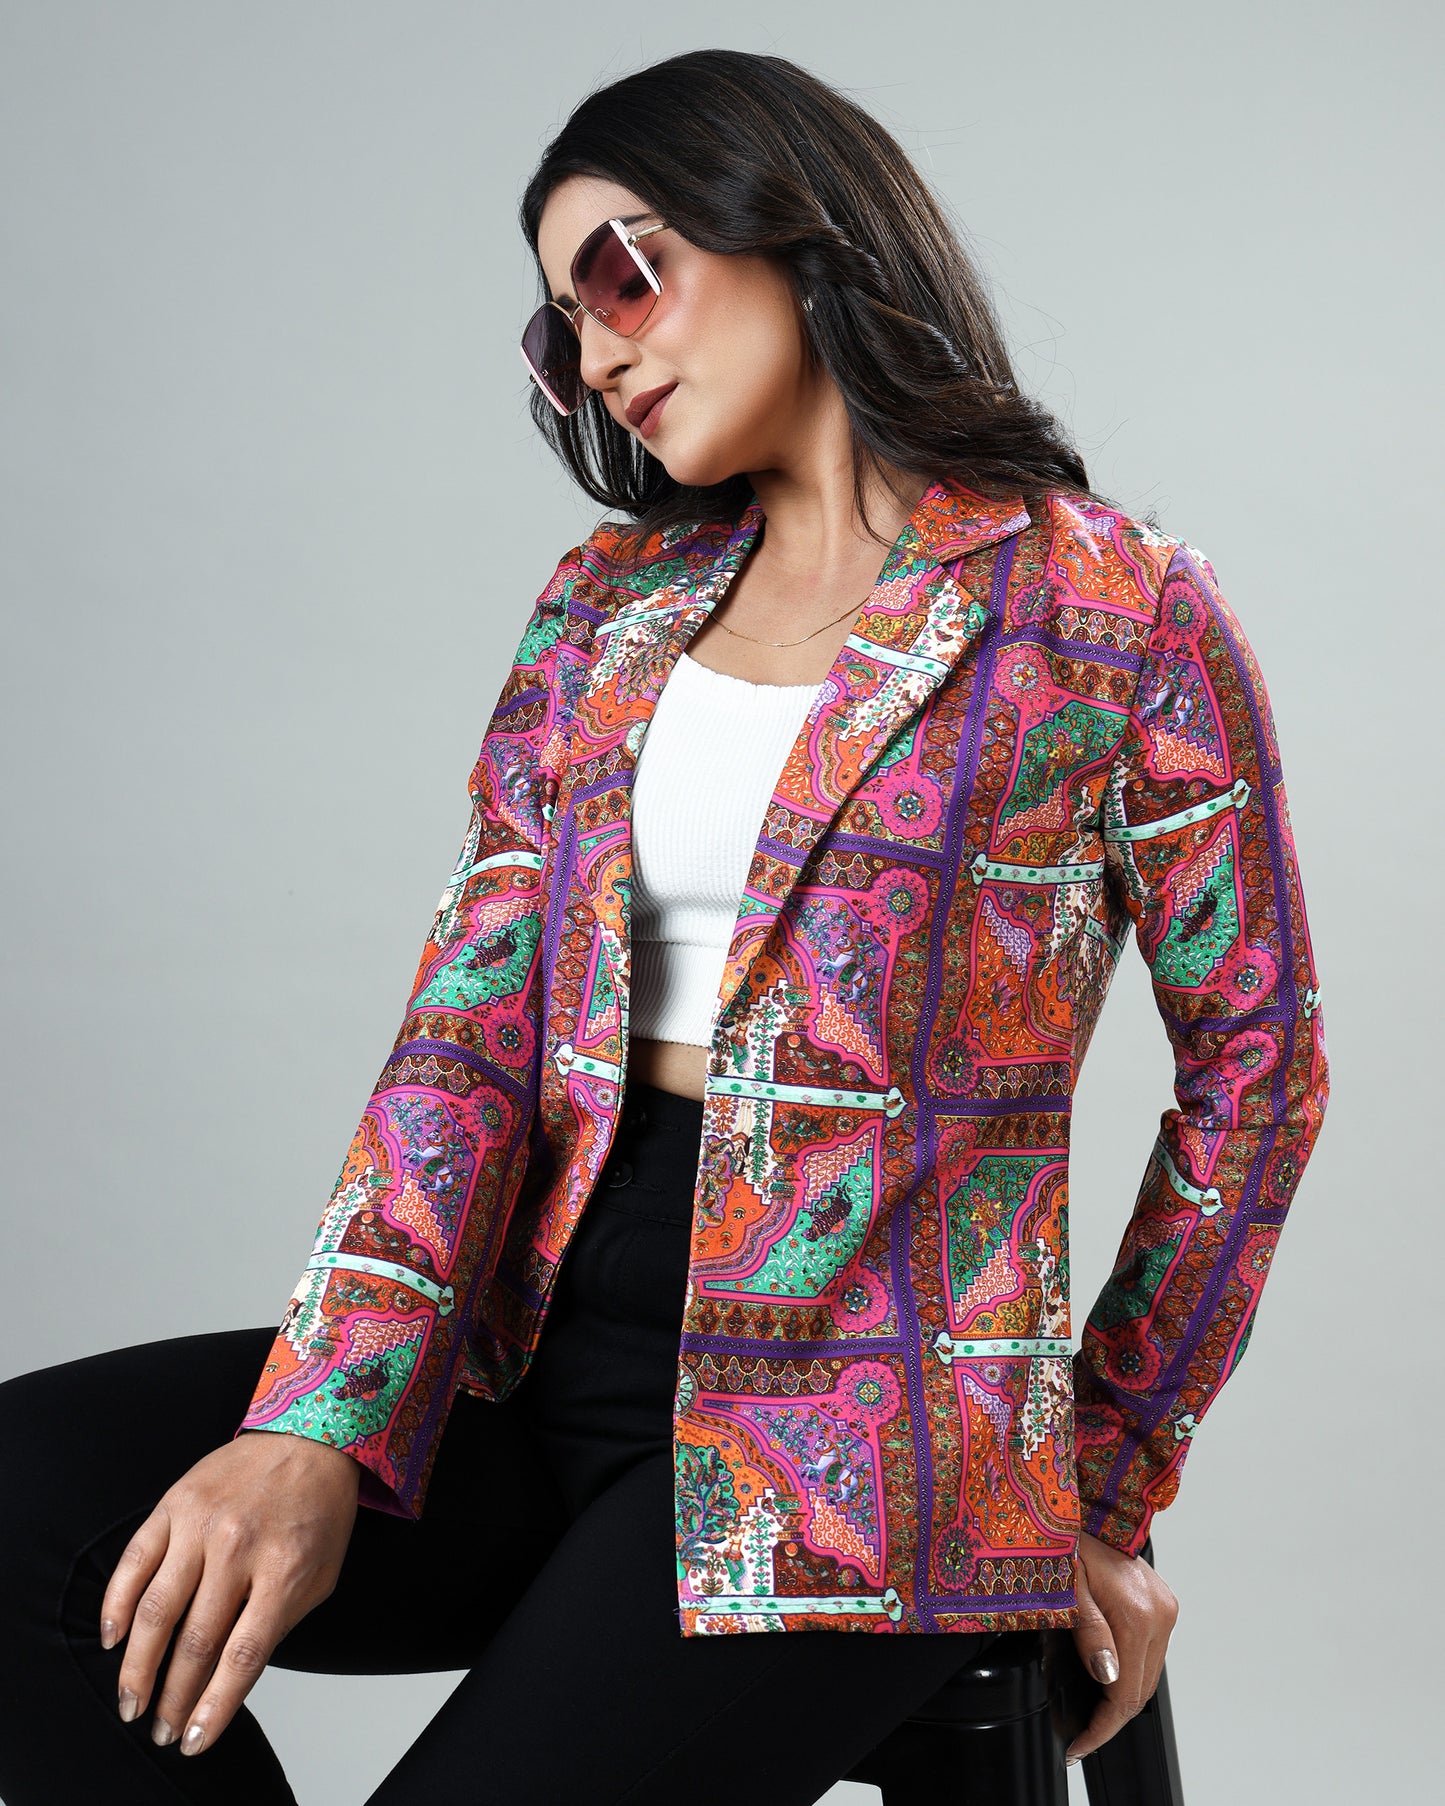 Heritage With Twist: Women's Traditional Jacket